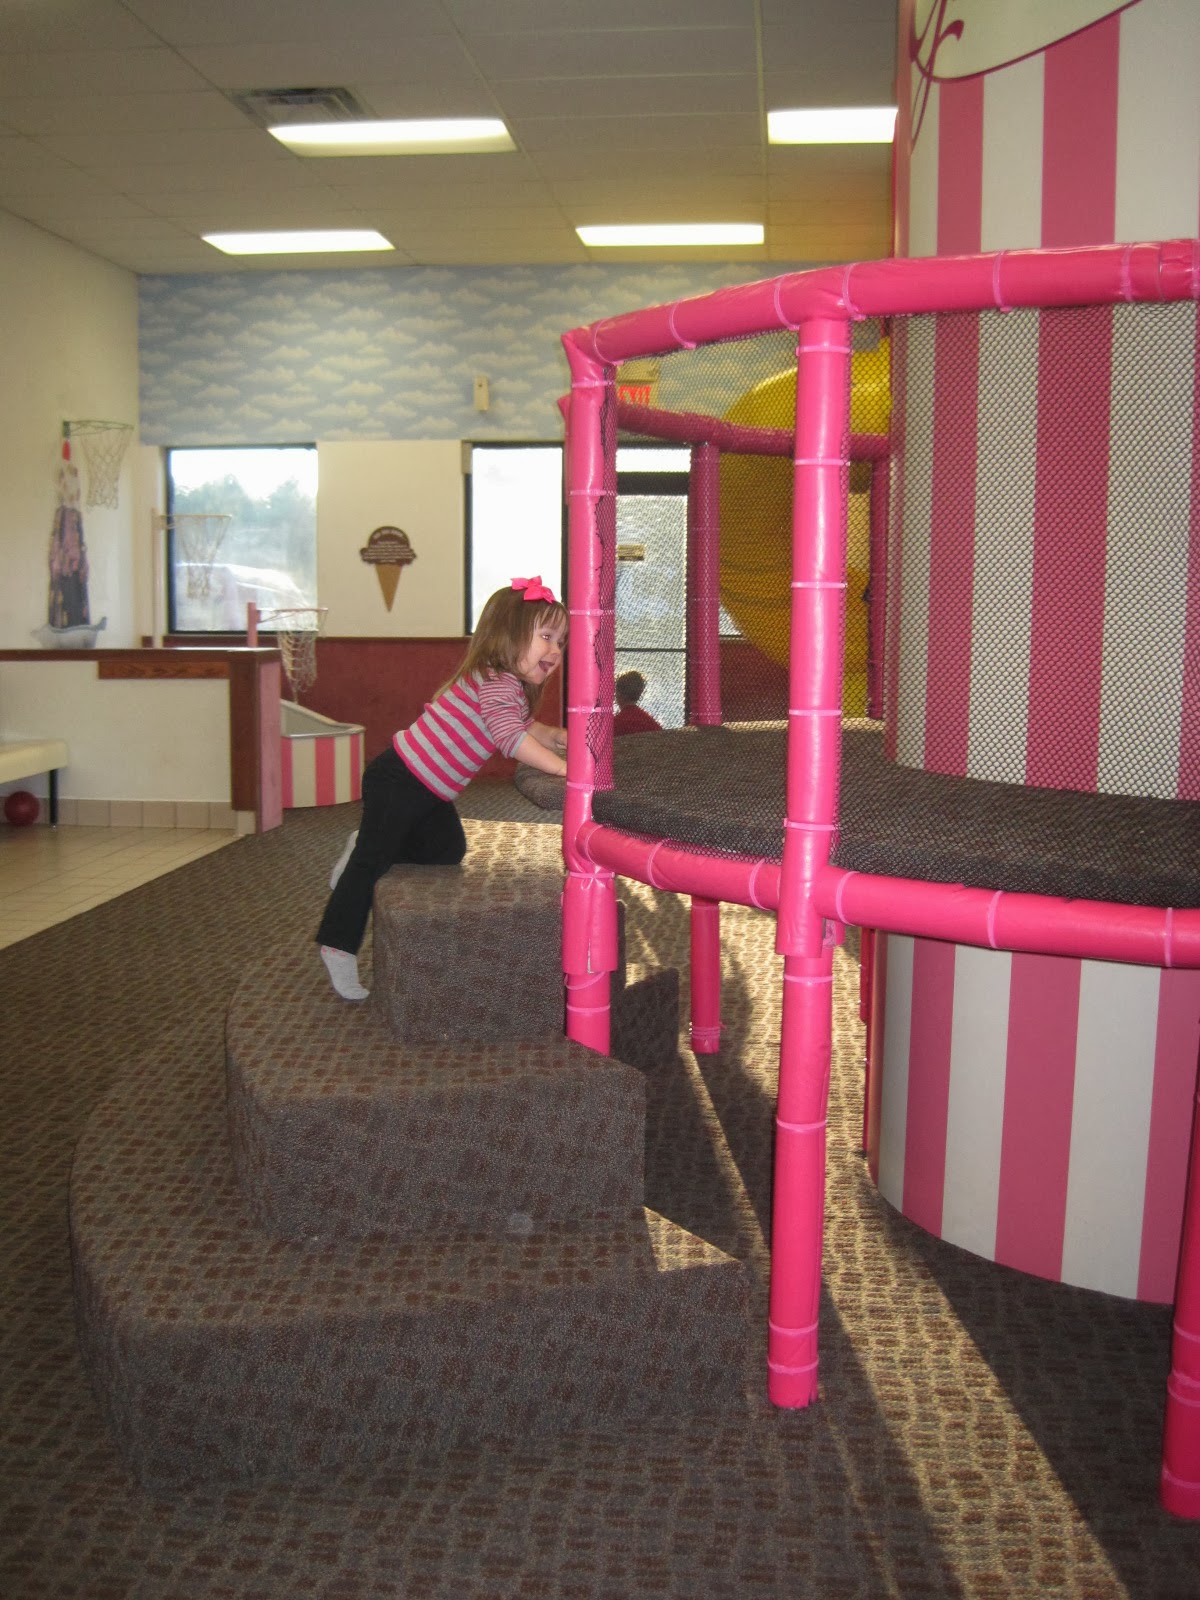 The Many Layers of Me: Graeter's Play Area